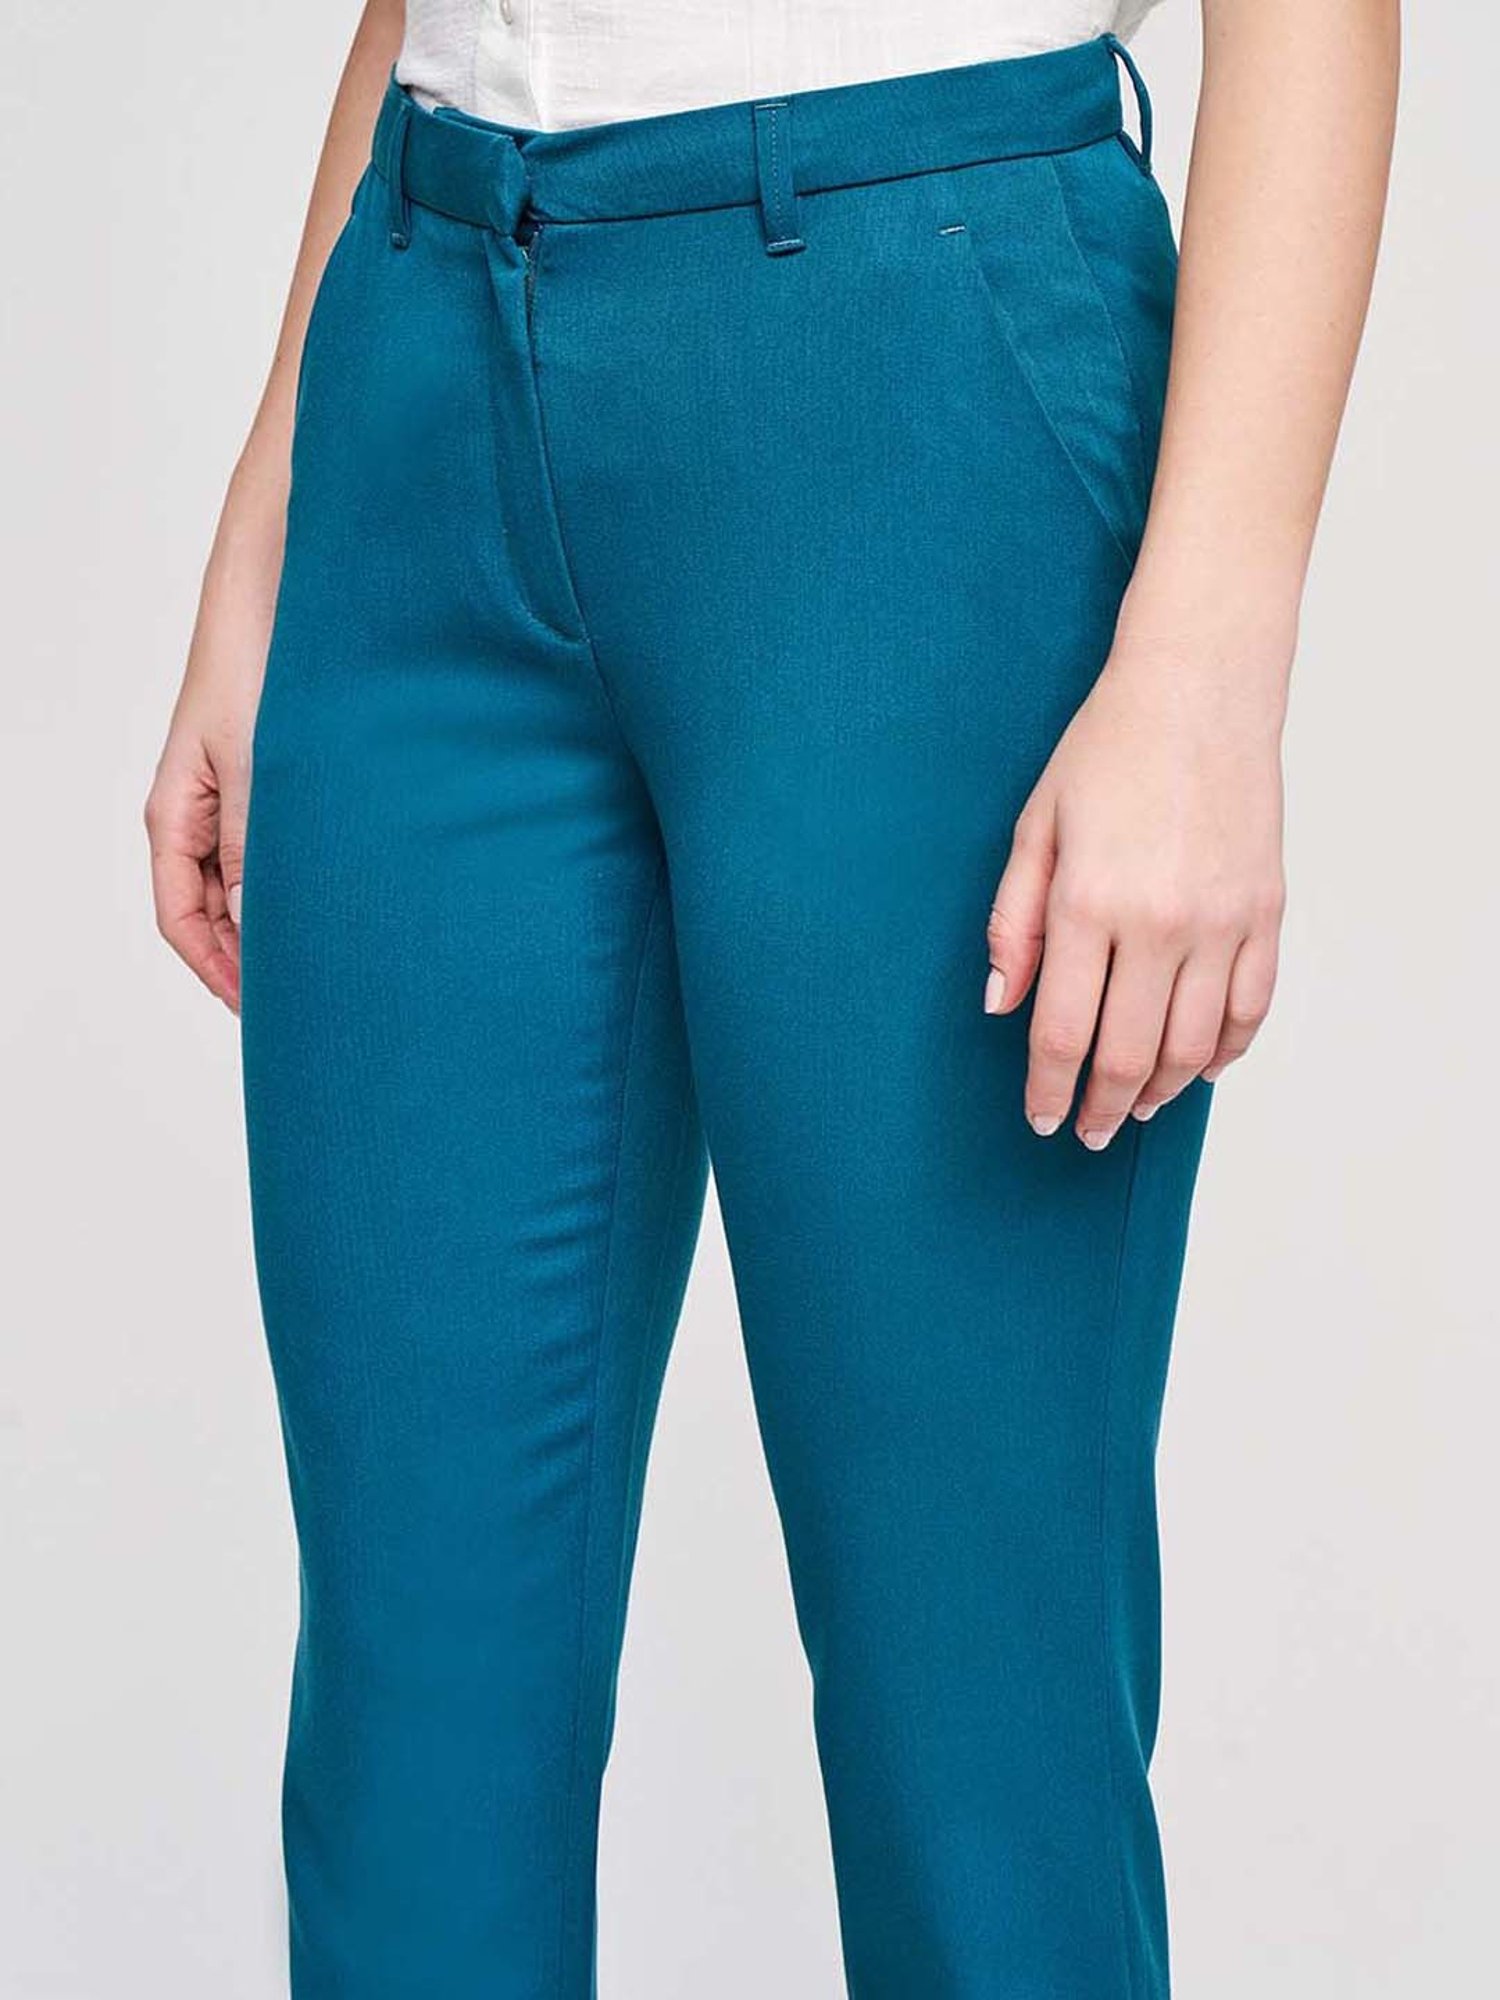 Blue Denim High Waisted Stretch Skinny Jeans With Wide Legs And Distressed  Bootcut Flared Jean Trousers For Ladies For Women Fall 2021 Collection From  Xmlongbida, $21.52 | DHgate.Com